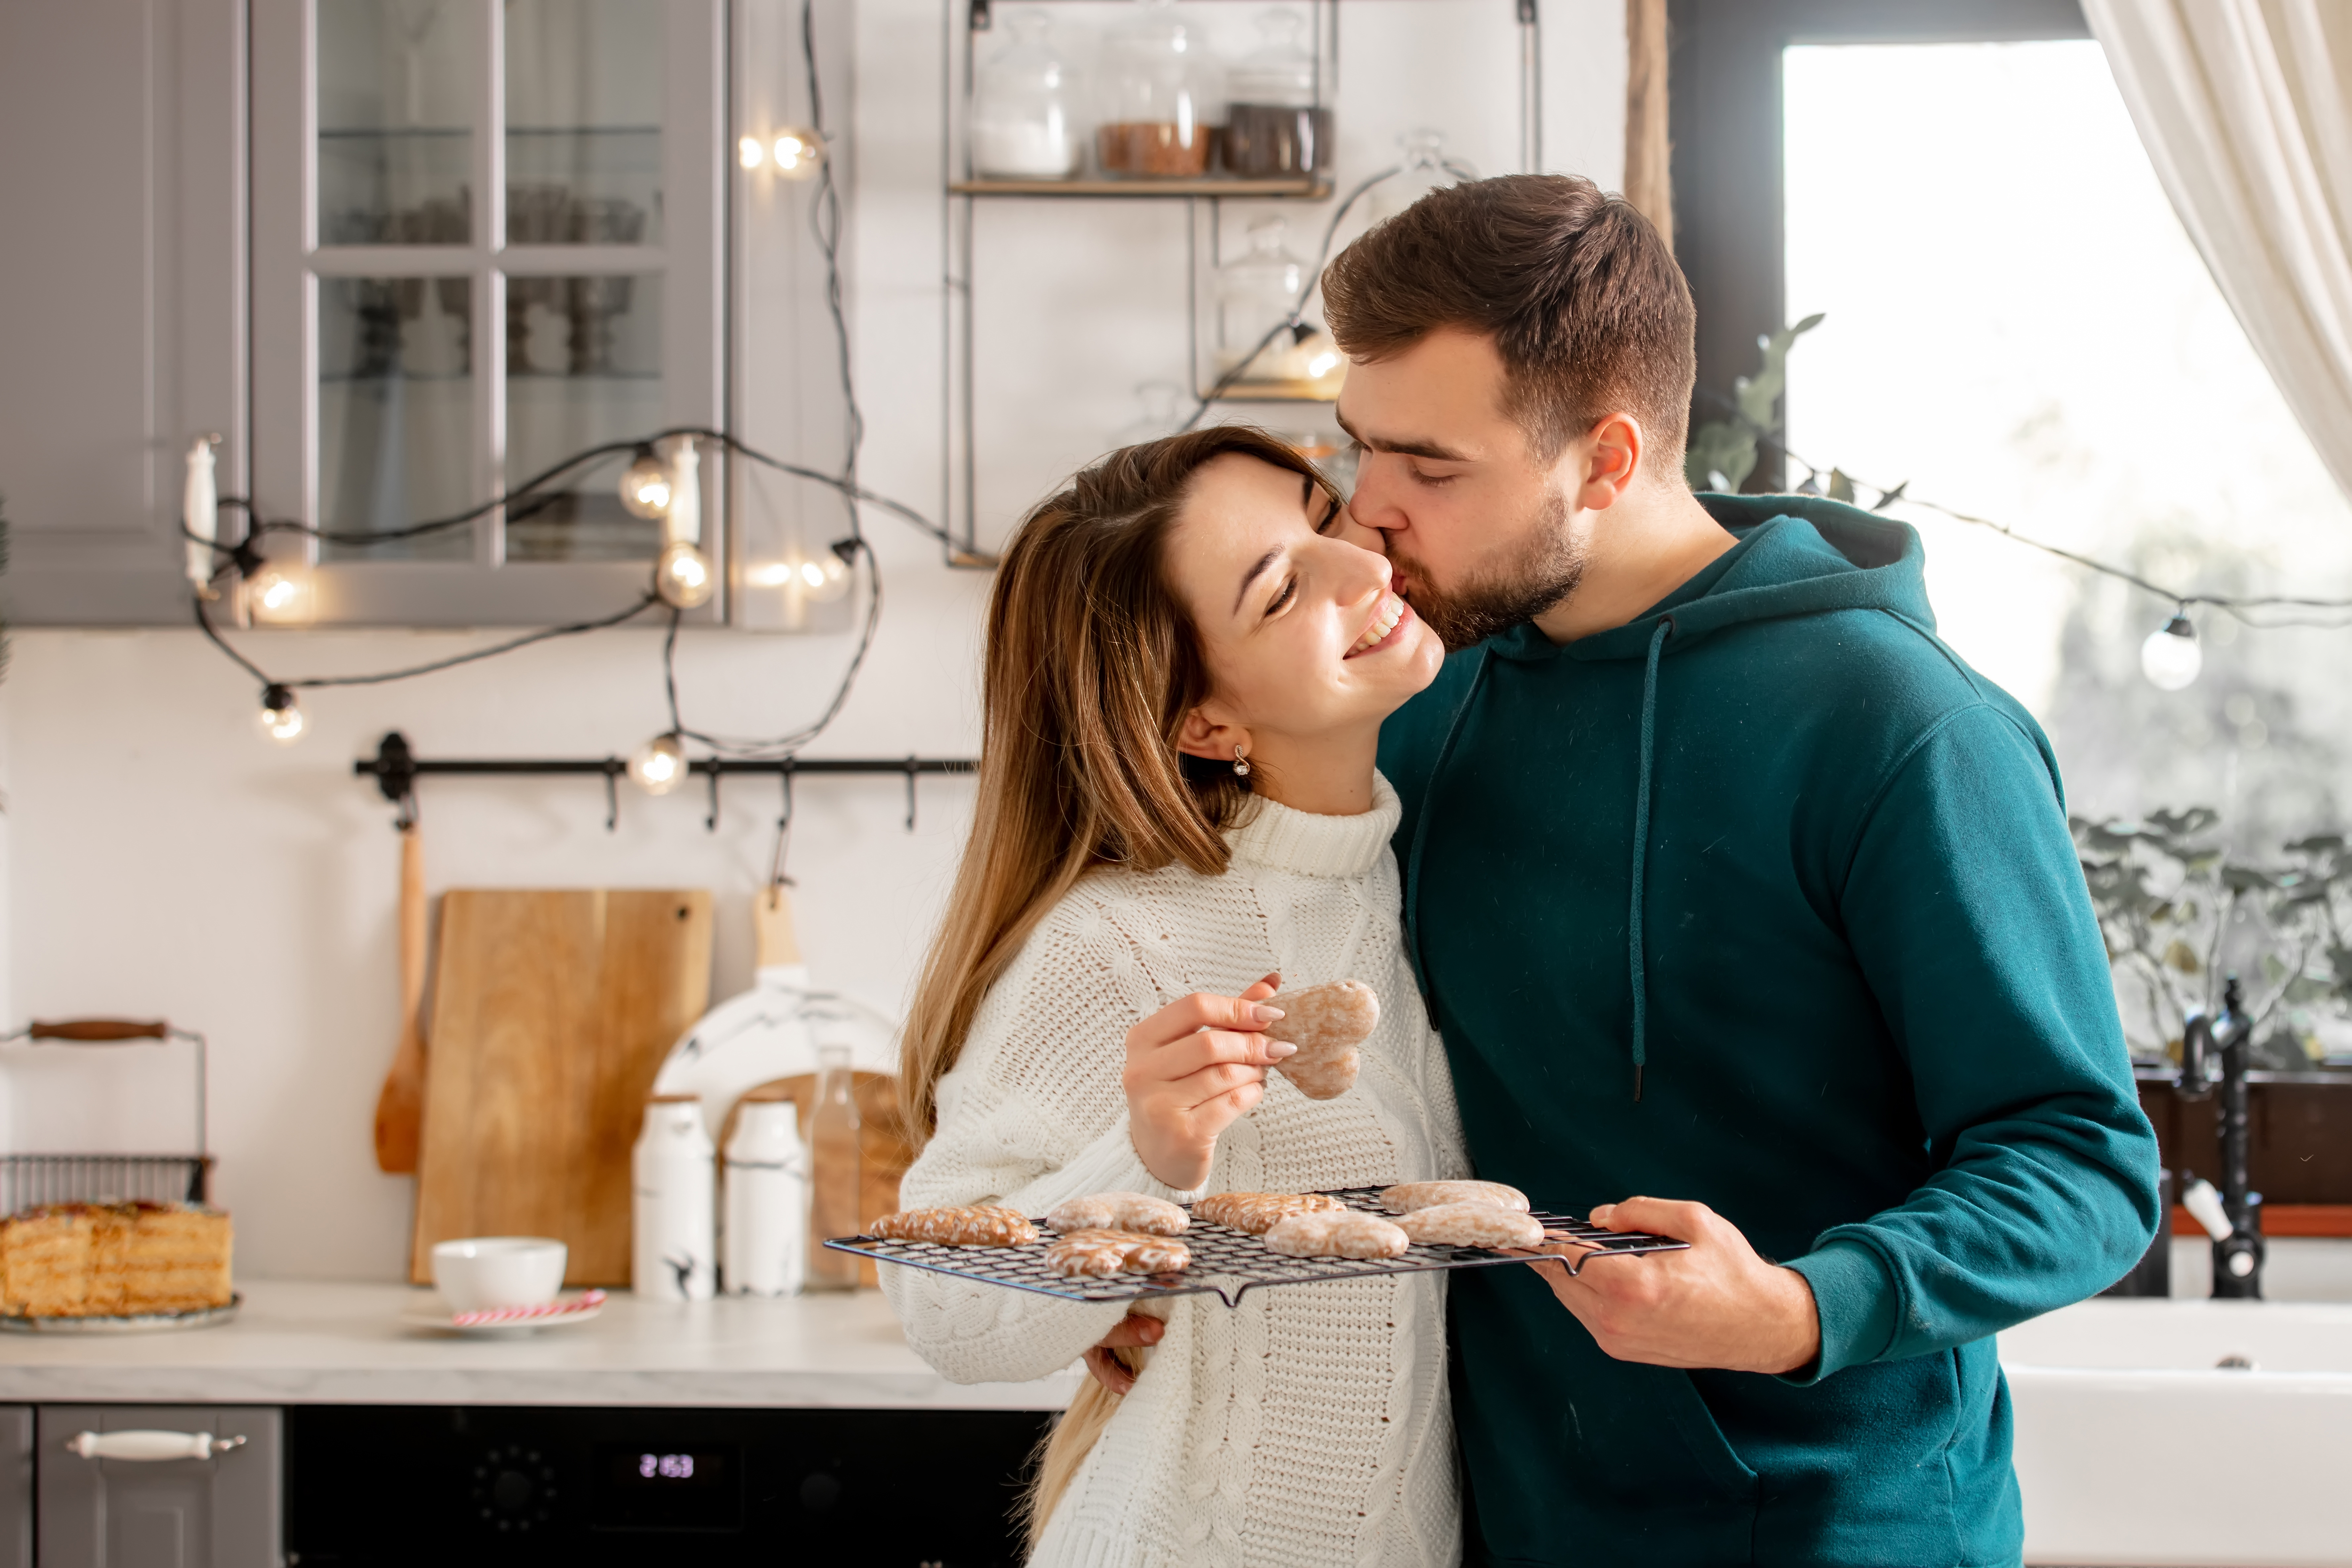 A man kissing his wife while baking cookies at home | Source: Shutterstock